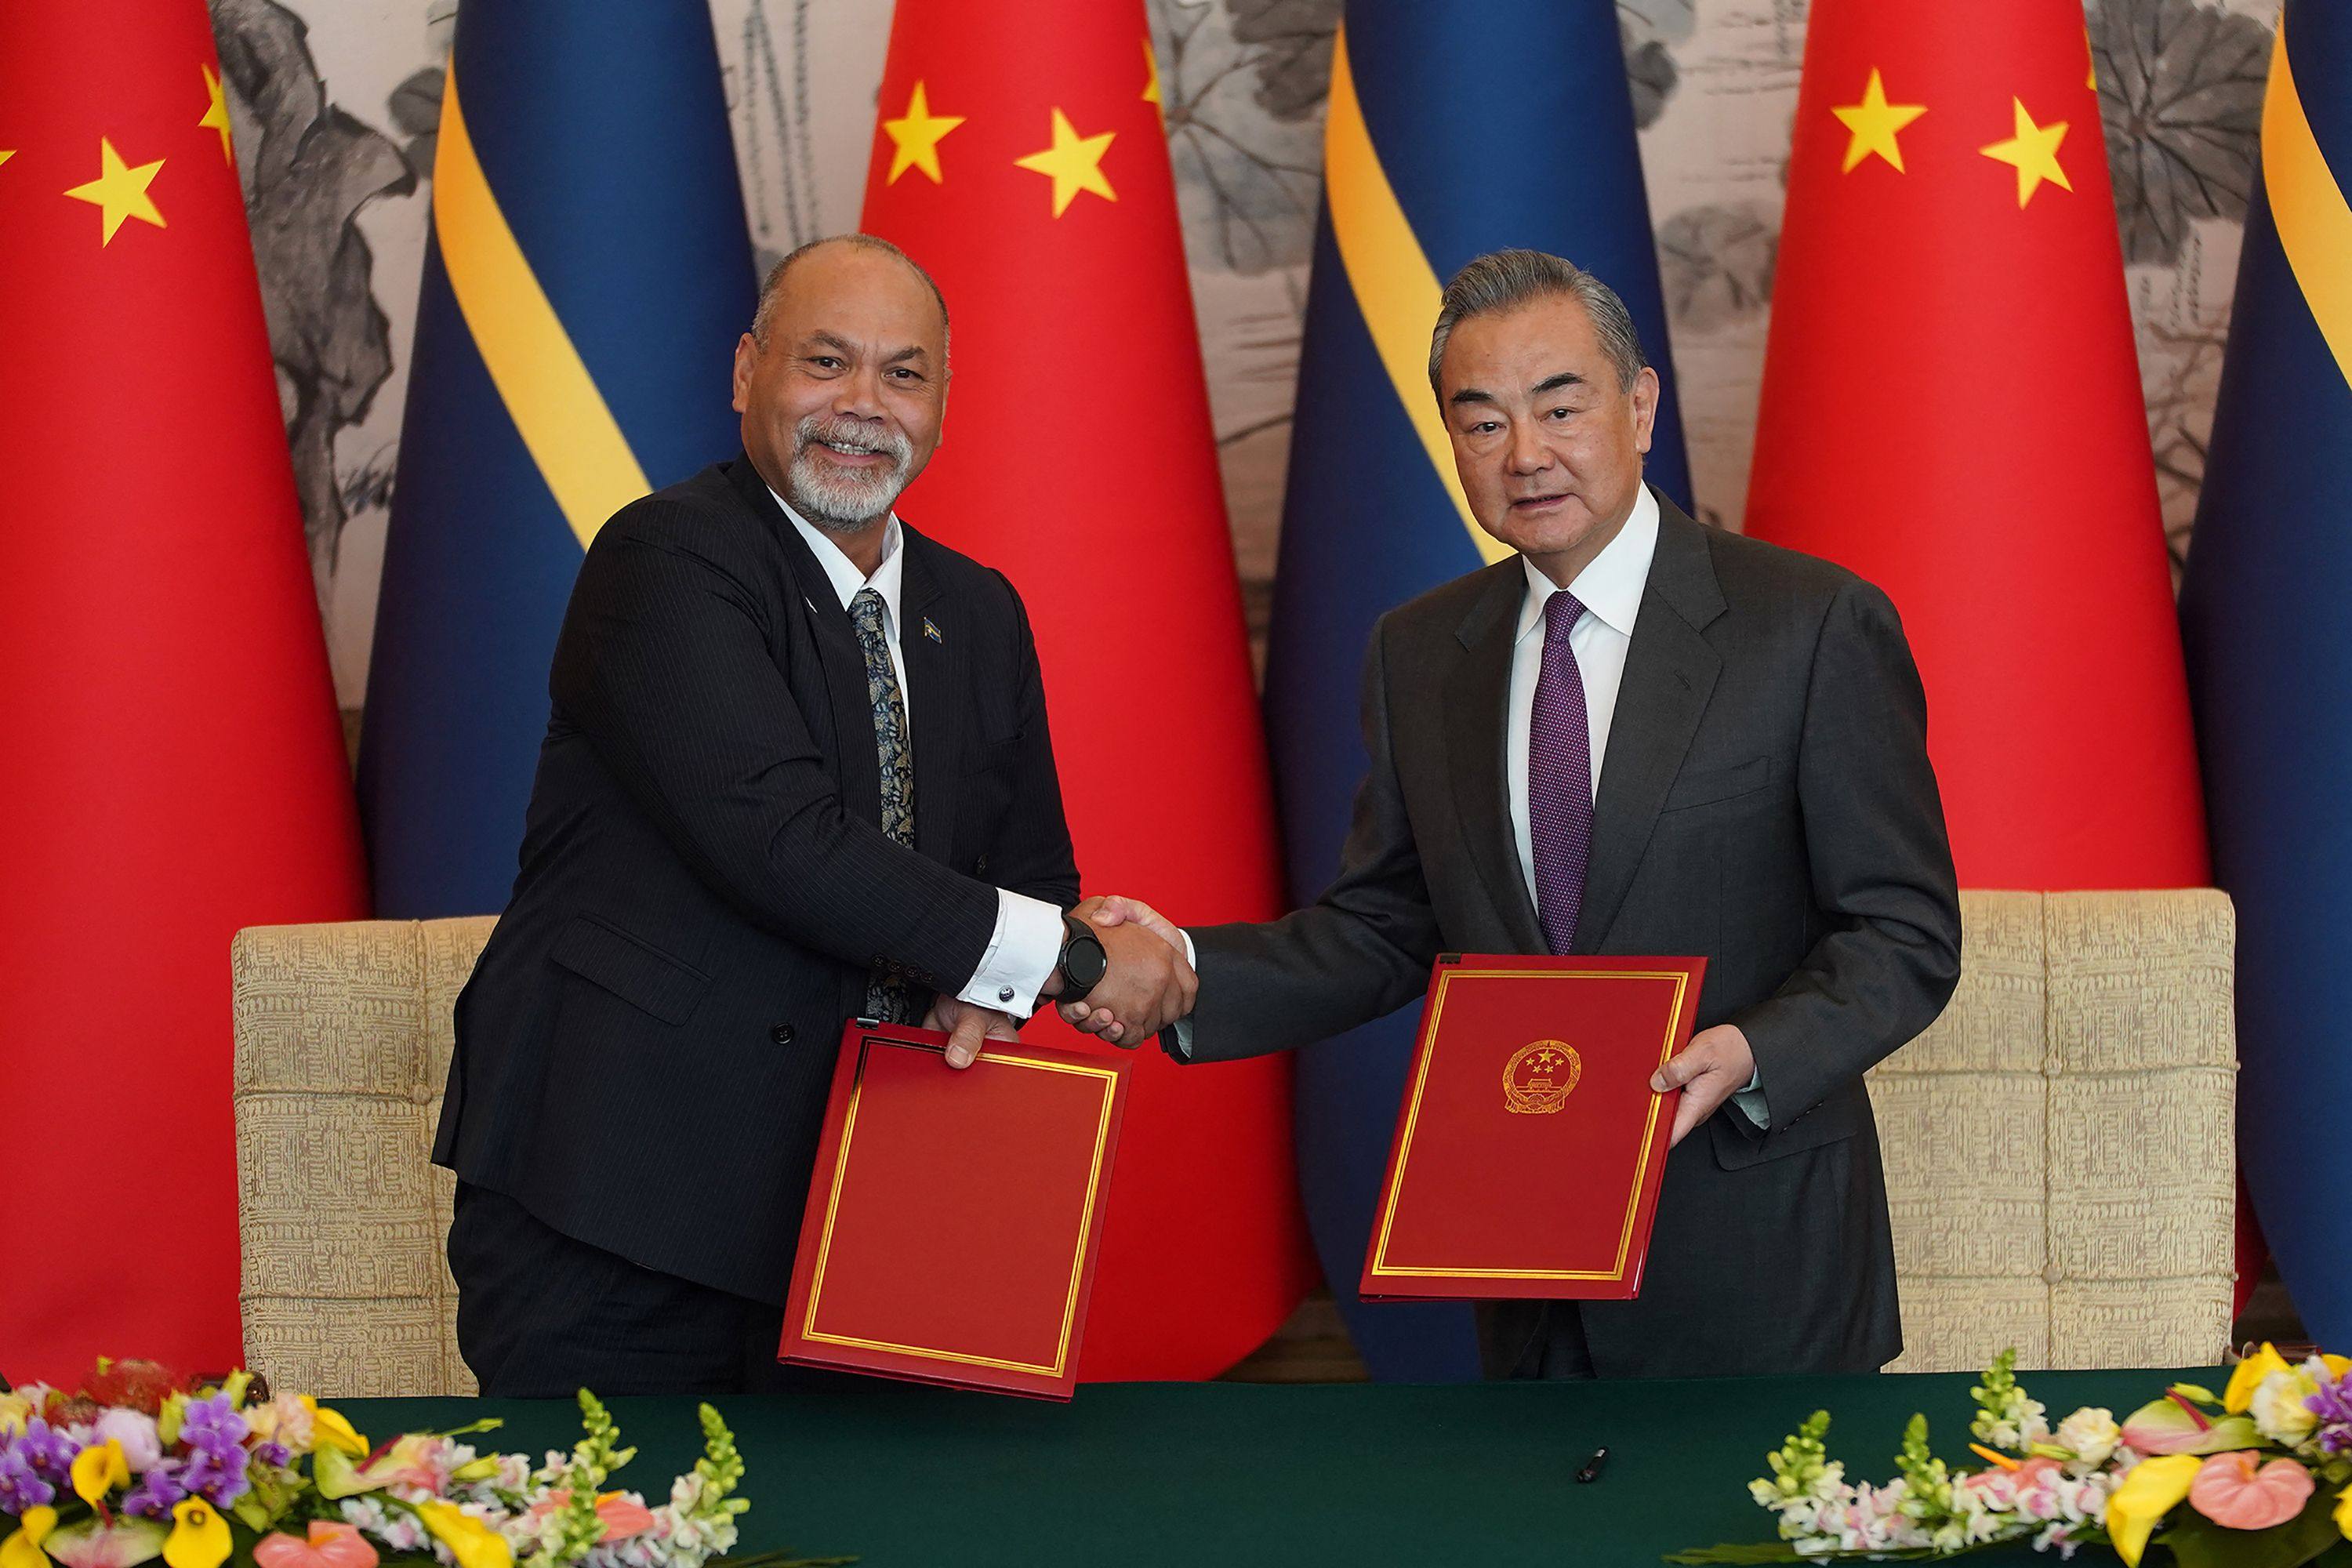 Nauru’s foreign minister Lionel Aingimea, left, shakes hands with China’s Foreign Minister Wang Yi after signing the joint communiqué on the resumption of diplomatic relations. Photo: AFP